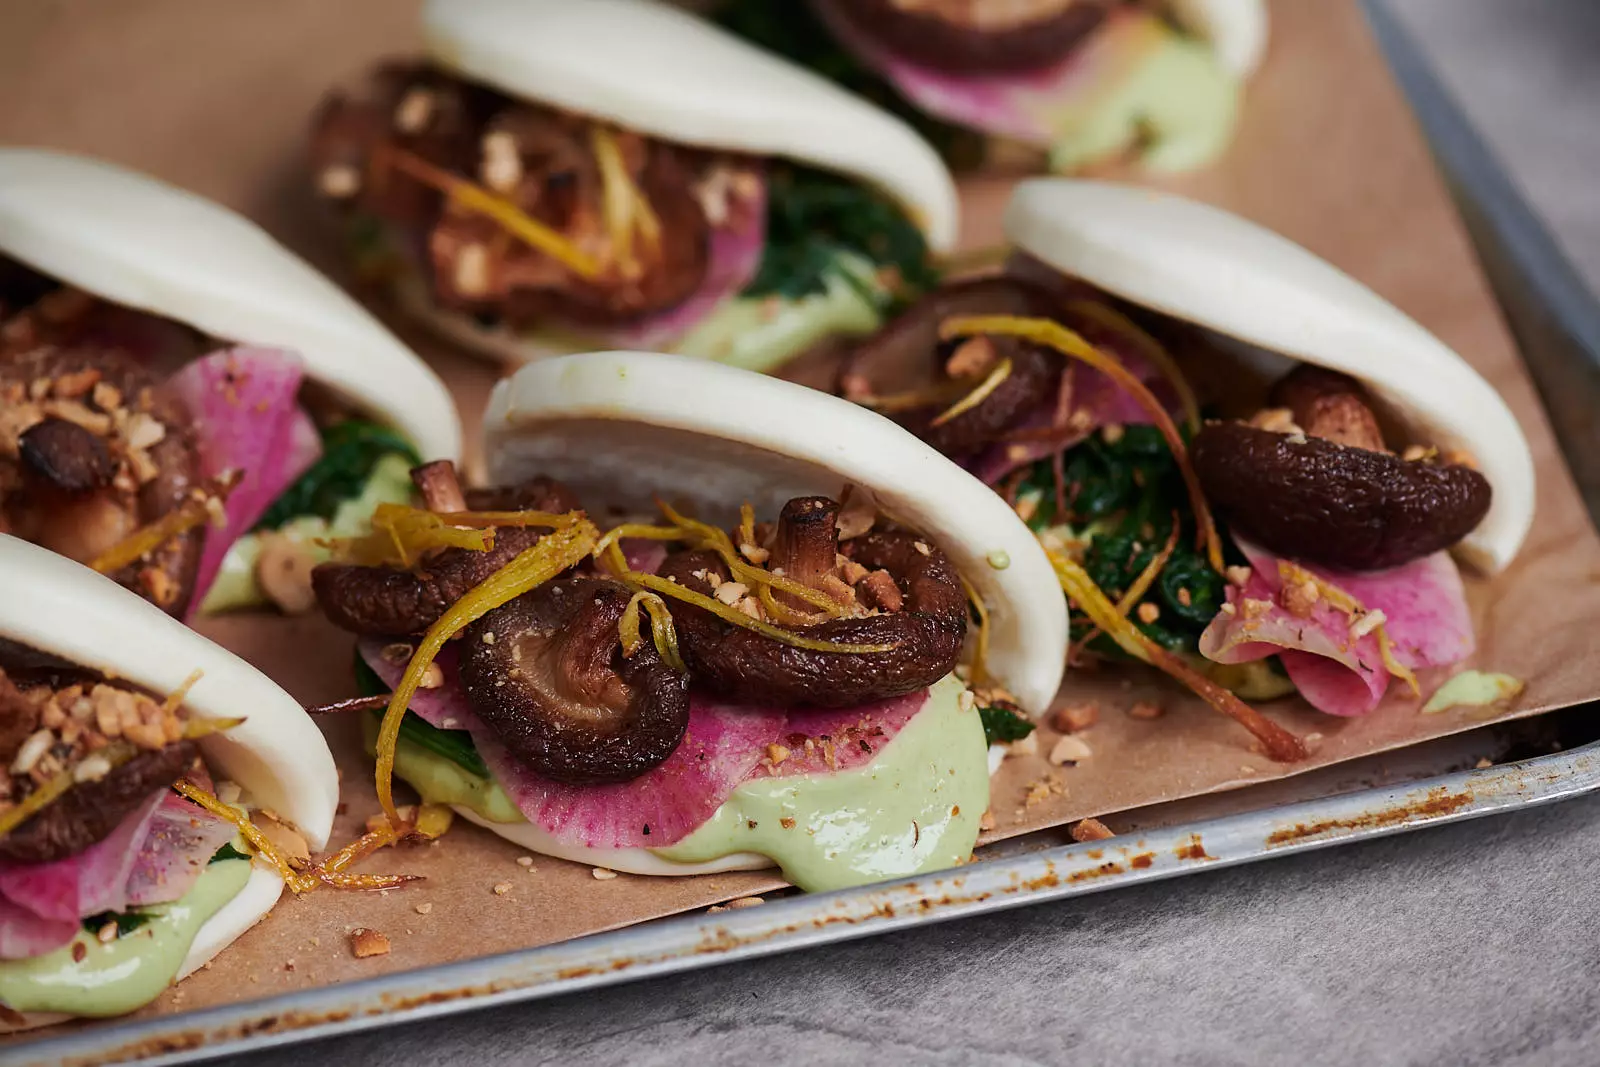 All proceeds from the sale of Hellmann's bao buns will go to vegan charity Veganuary (